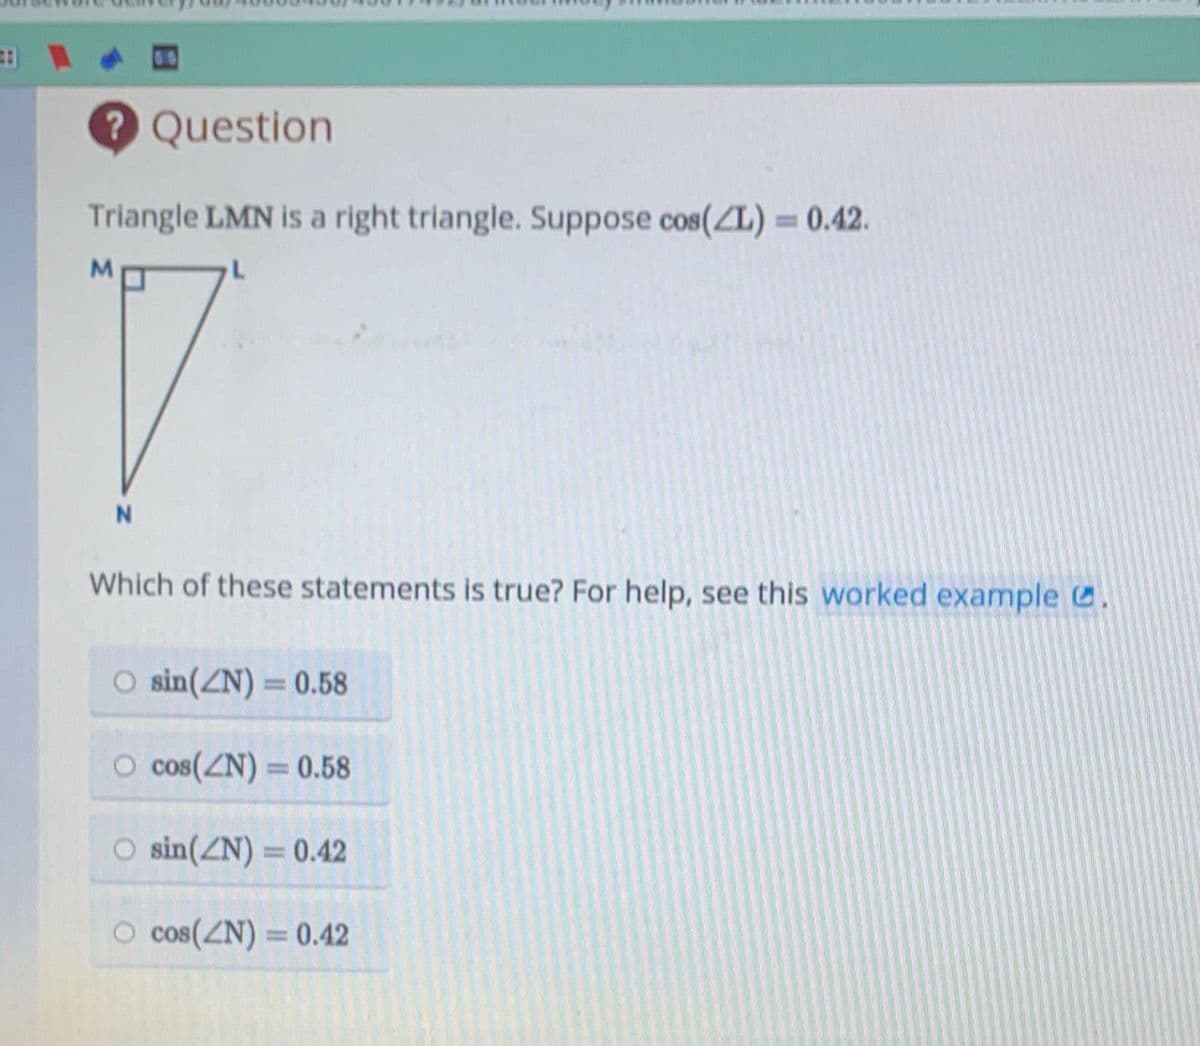 #
? Question
Triangle LMN is a right triangle. Suppose cos(L) = 0.42.
L
M
N
Which of these statements is true? For help, see this worked example.
O sin(ZN) = 0.58
O cos(N) = 0.58
O sin(ZN) = 0.42
cos(ZN) = 0.42